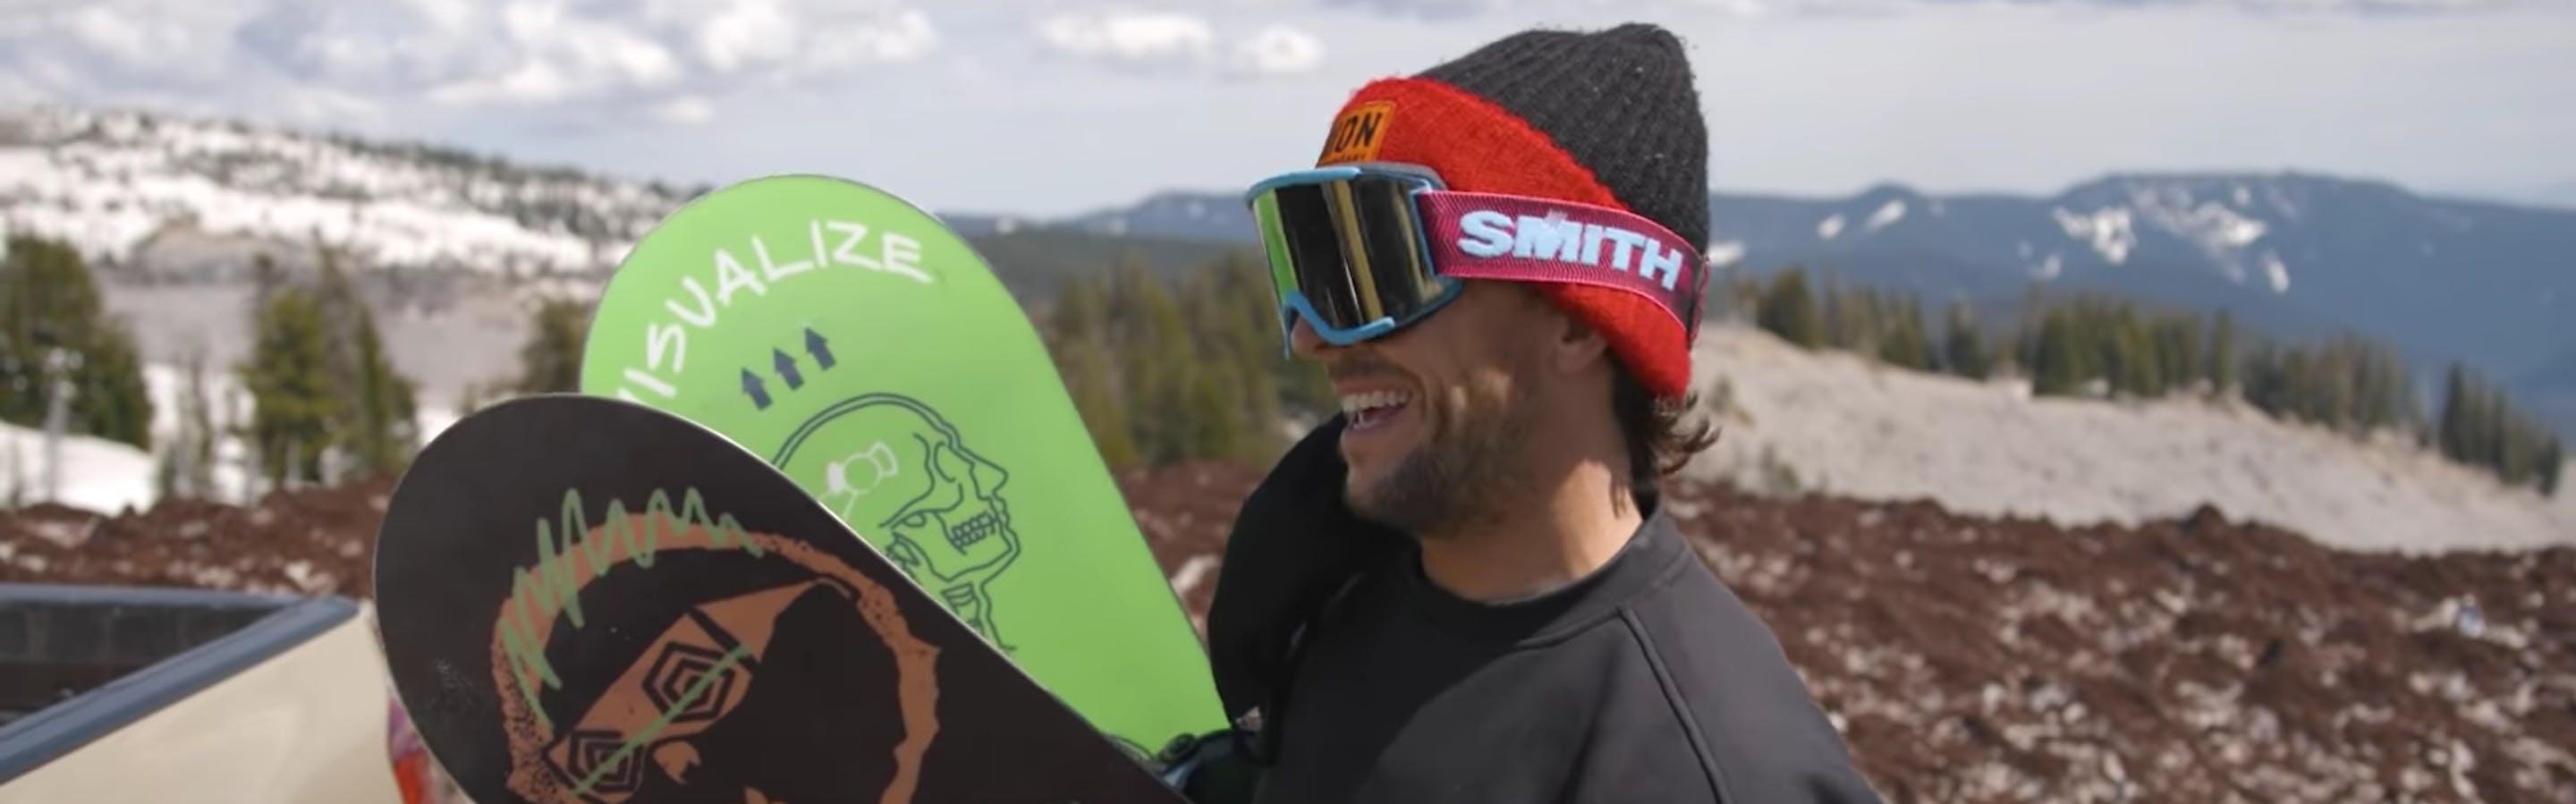 Chatting with the Pros: Freestyle Boarder and Music Enthusiast Scott  Stevens on the Evolution of the Snowboarding Industry